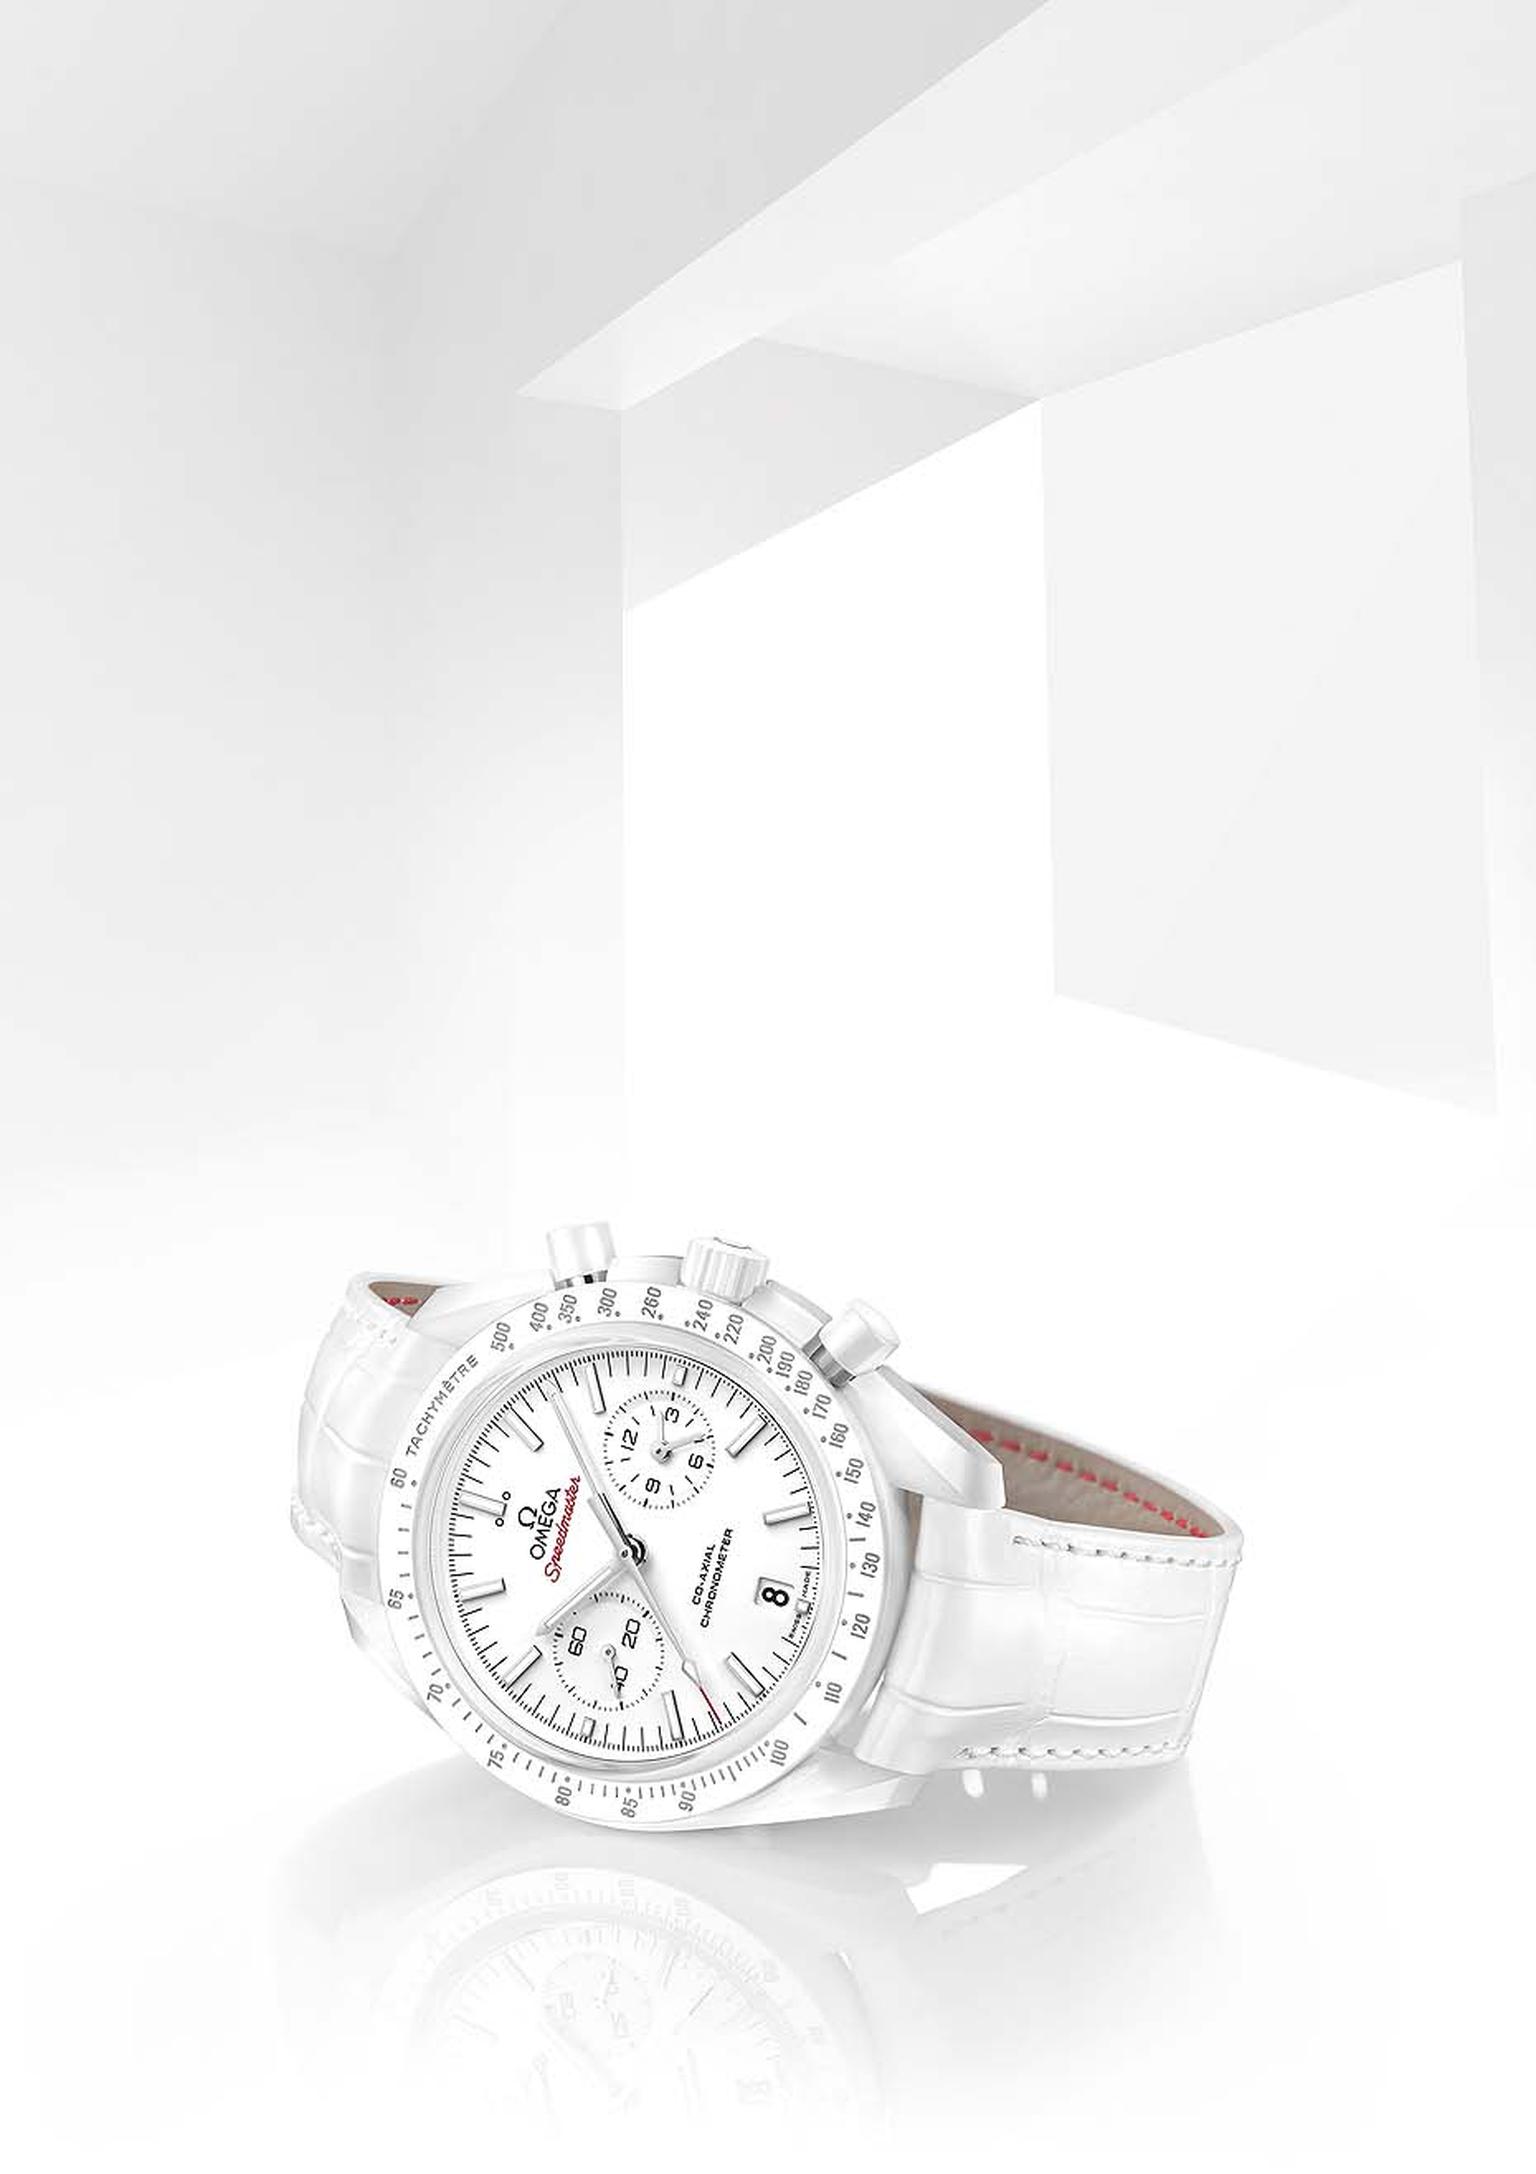 The new bright white Omega Speedmaster White Side of the Moon watch with a 44.25mm white ceramic case, presented at Baselworld 2015.